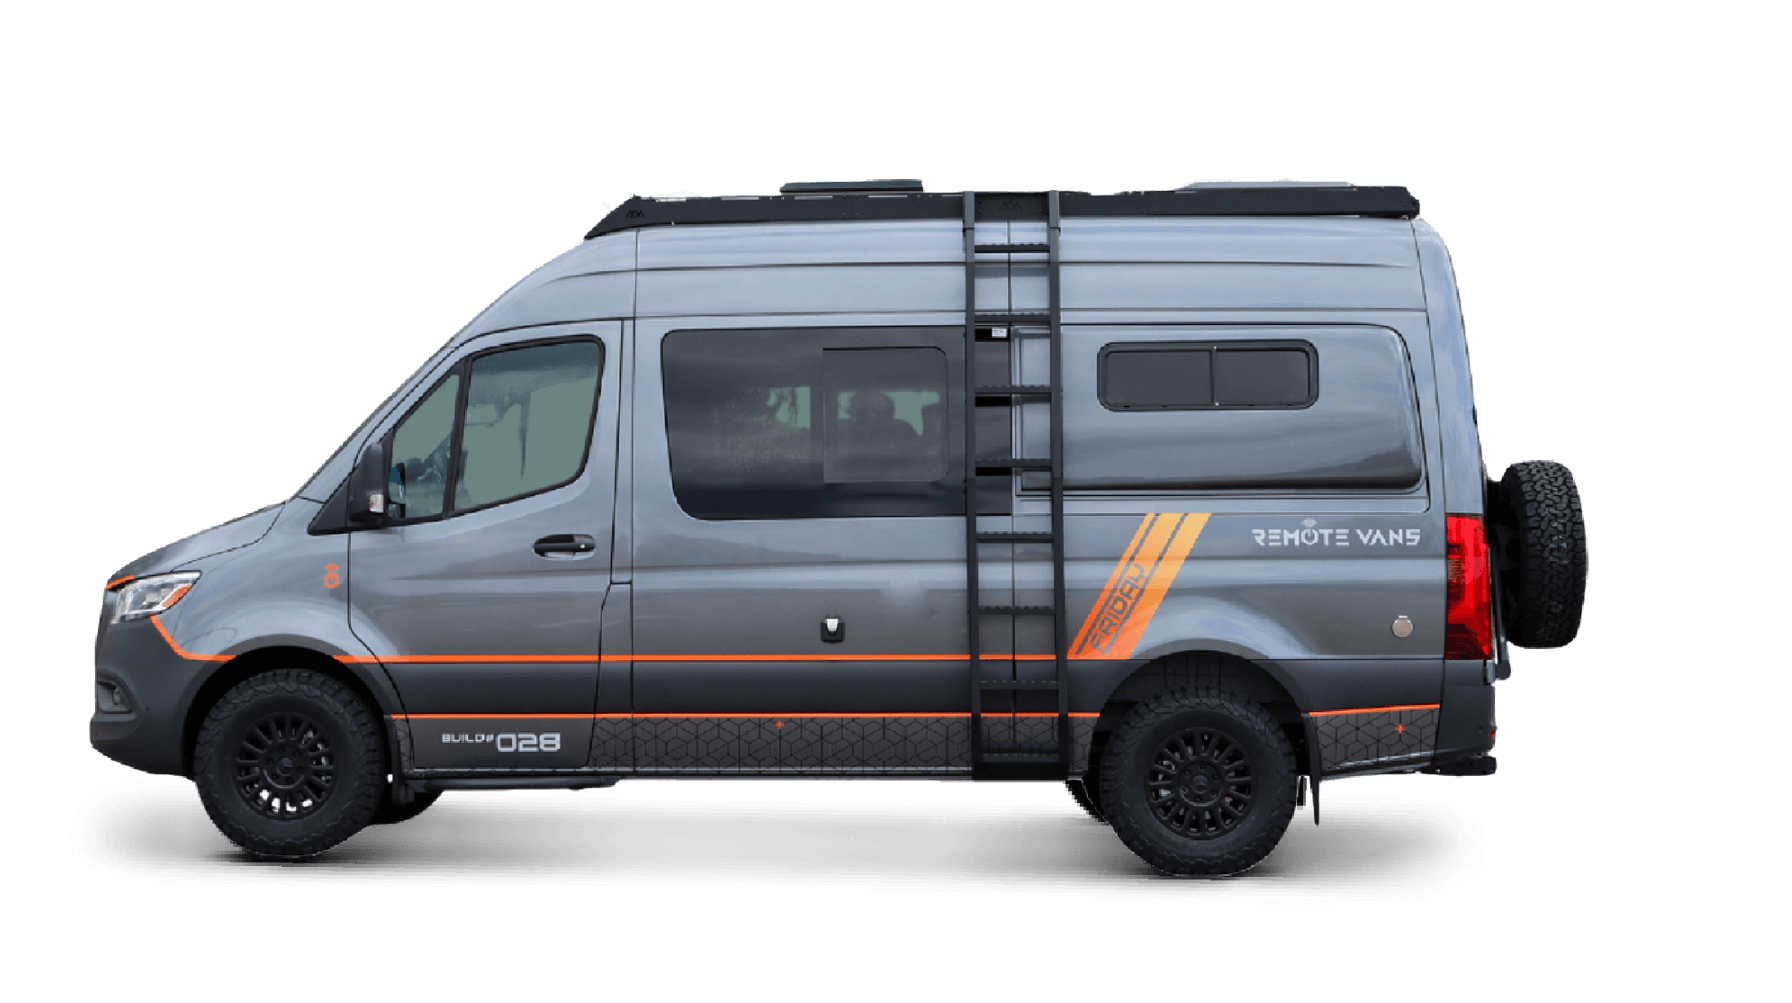 High-efficiency power and water systems. Sleeps 2-4. A sprinter van build that's made in the USA, with high-quality components.